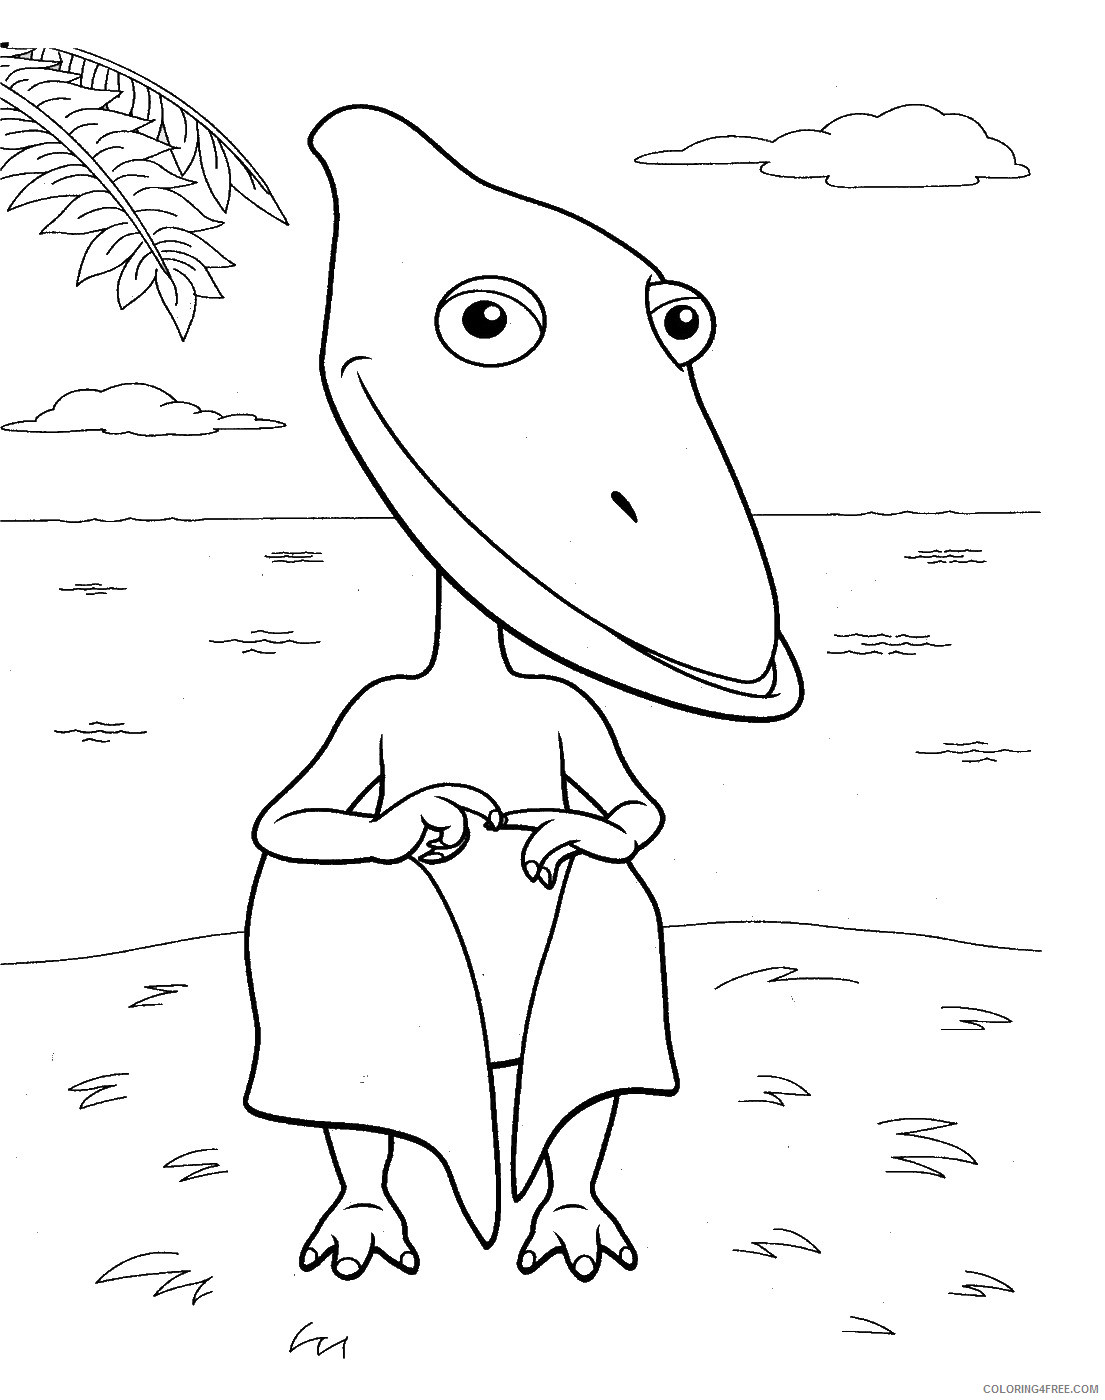 Dinosaur Train Coloring Pages Cartoons dino_train_cl_03 Printable 2020 2224 Coloring4free